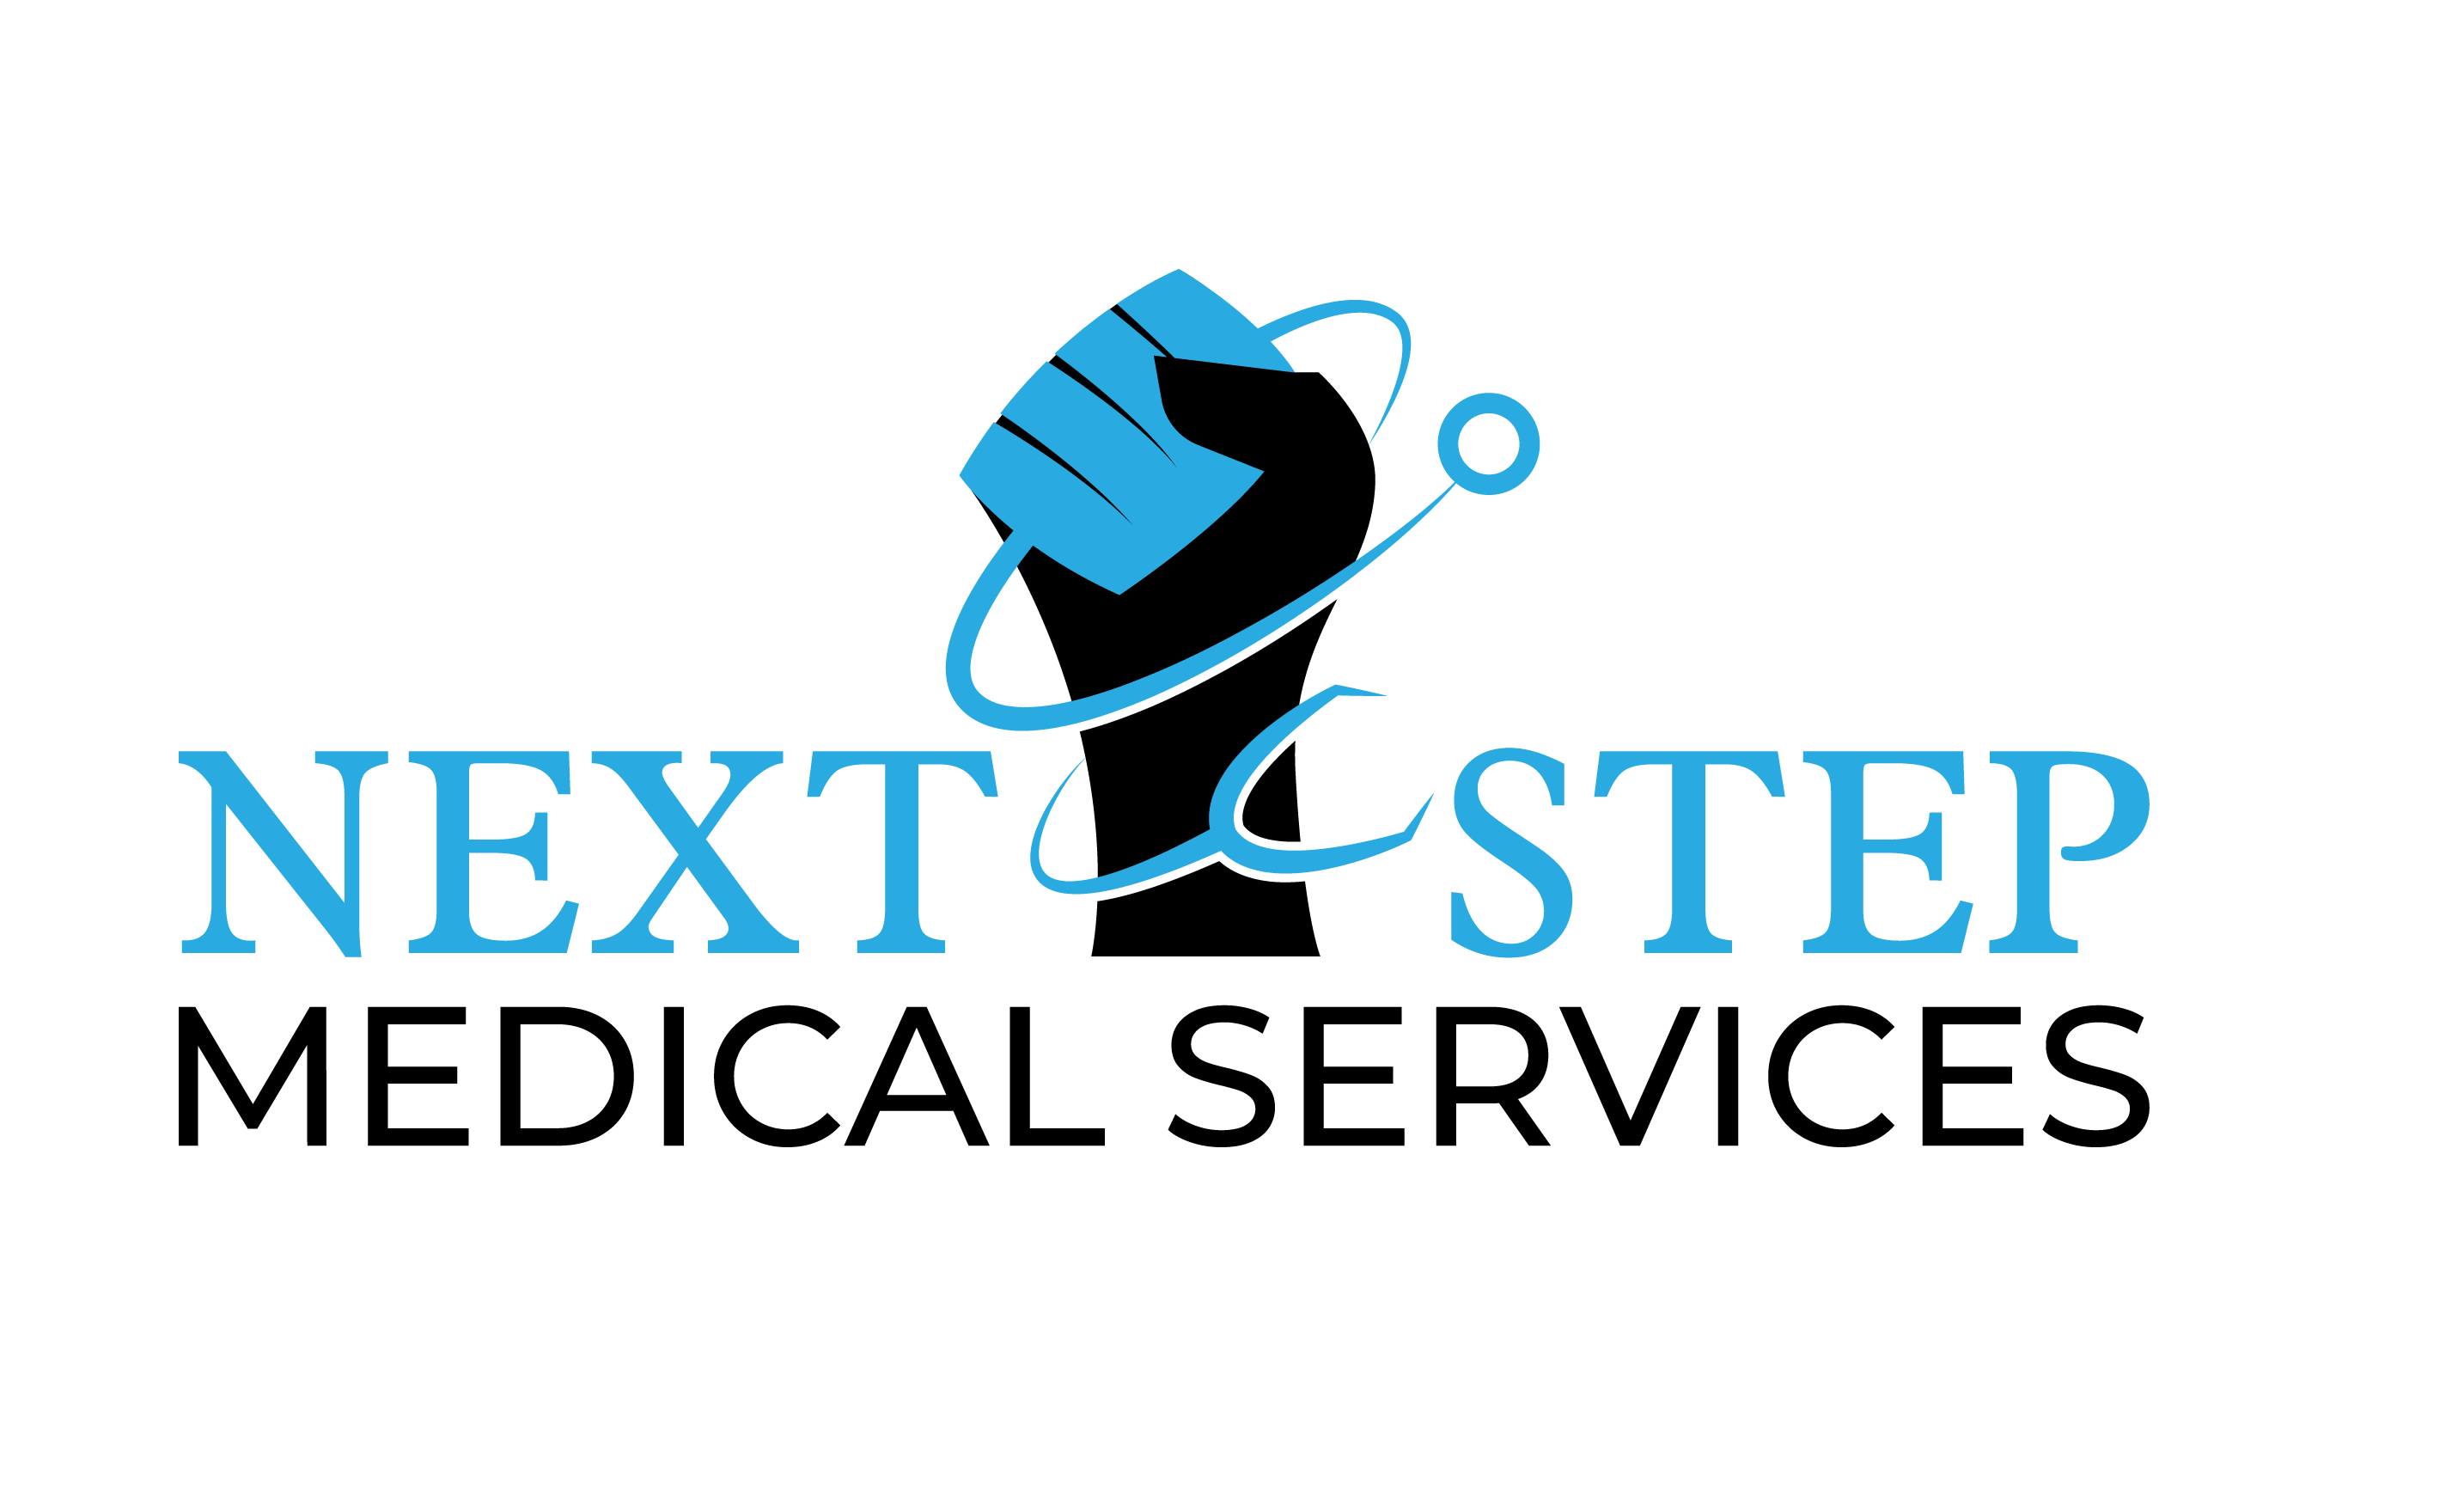 Next Step Medical Services - Solution for Addiction Treatment, TX